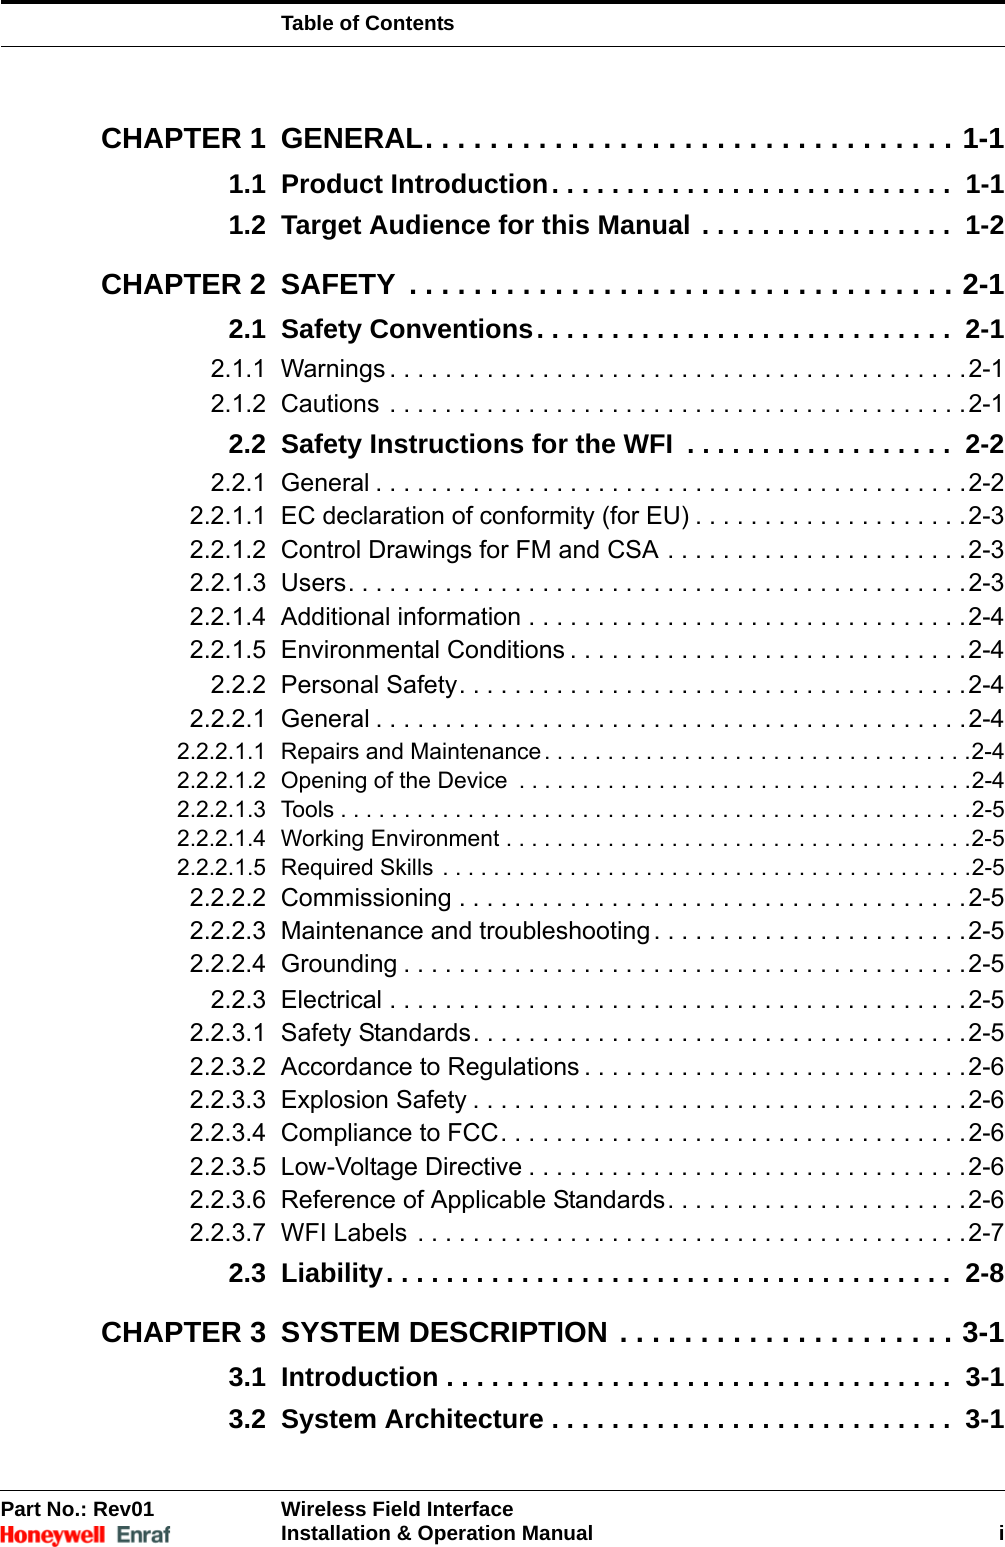 Table of ContentsPart No.: Rev01 Wireless Field InterfaceInstallation &amp; Operation Manual iCHAPTER 1 GENERAL. . . . . . . . . . . . . . . . . . . . . . . . . . . . . . . . . 1-11.1 Product Introduction. . . . . . . . . . . . . . . . . . . . . . . . . . .  1-11.2 Target Audience for this Manual . . . . . . . . . . . . . . . . .  1-2CHAPTER 2 SAFETY  . . . . . . . . . . . . . . . . . . . . . . . . . . . . . . . . . . 2-12.1 Safety Conventions. . . . . . . . . . . . . . . . . . . . . . . . . . . .  2-12.1.1 Warnings . . . . . . . . . . . . . . . . . . . . . . . . . . . . . . . . . . . . . . . . . .2-12.1.2 Cautions . . . . . . . . . . . . . . . . . . . . . . . . . . . . . . . . . . . . . . . . . .2-12.2 Safety Instructions for the WFI  . . . . . . . . . . . . . . . . . .  2-22.2.1 General . . . . . . . . . . . . . . . . . . . . . . . . . . . . . . . . . . . . . . . . . . .2-22.2.1.1 EC declaration of conformity (for EU) . . . . . . . . . . . . . . . . . . . .2-32.2.1.2 Control Drawings for FM and CSA . . . . . . . . . . . . . . . . . . . . . .2-32.2.1.3 Users. . . . . . . . . . . . . . . . . . . . . . . . . . . . . . . . . . . . . . . . . . . . .2-32.2.1.4 Additional information . . . . . . . . . . . . . . . . . . . . . . . . . . . . . . . .2-42.2.1.5 Environmental Conditions . . . . . . . . . . . . . . . . . . . . . . . . . . . . .2-42.2.2 Personal Safety. . . . . . . . . . . . . . . . . . . . . . . . . . . . . . . . . . . . .2-42.2.2.1 General . . . . . . . . . . . . . . . . . . . . . . . . . . . . . . . . . . . . . . . . . . .2-42.2.2.1.1 Repairs and Maintenance. . . . . . . . . . . . . . . . . . . . . . . . . . . . . . . . . .2-42.2.2.1.2 Opening of the Device  . . . . . . . . . . . . . . . . . . . . . . . . . . . . . . . . . . . .2-42.2.2.1.3 Tools . . . . . . . . . . . . . . . . . . . . . . . . . . . . . . . . . . . . . . . . . . . . . . . . . .2-52.2.2.1.4 Working Environment . . . . . . . . . . . . . . . . . . . . . . . . . . . . . . . . . . . . .2-52.2.2.1.5 Required Skills . . . . . . . . . . . . . . . . . . . . . . . . . . . . . . . . . . . . . . . . . .2-52.2.2.2 Commissioning . . . . . . . . . . . . . . . . . . . . . . . . . . . . . . . . . . . . .2-52.2.2.3 Maintenance and troubleshooting . . . . . . . . . . . . . . . . . . . . . . .2-52.2.2.4 Grounding . . . . . . . . . . . . . . . . . . . . . . . . . . . . . . . . . . . . . . . . .2-52.2.3 Electrical . . . . . . . . . . . . . . . . . . . . . . . . . . . . . . . . . . . . . . . . . .2-52.2.3.1 Safety Standards. . . . . . . . . . . . . . . . . . . . . . . . . . . . . . . . . . . .2-52.2.3.2 Accordance to Regulations . . . . . . . . . . . . . . . . . . . . . . . . . . . .2-62.2.3.3 Explosion Safety . . . . . . . . . . . . . . . . . . . . . . . . . . . . . . . . . . . .2-62.2.3.4 Compliance to FCC. . . . . . . . . . . . . . . . . . . . . . . . . . . . . . . . . .2-62.2.3.5 Low-Voltage Directive . . . . . . . . . . . . . . . . . . . . . . . . . . . . . . . .2-62.2.3.6 Reference of Applicable Standards. . . . . . . . . . . . . . . . . . . . . .2-62.2.3.7 WFI Labels  . . . . . . . . . . . . . . . . . . . . . . . . . . . . . . . . . . . . . . . .2-72.3 Liability. . . . . . . . . . . . . . . . . . . . . . . . . . . . . . . . . . . . . .  2-8CHAPTER 3 SYSTEM DESCRIPTION . . . . . . . . . . . . . . . . . . . . . 3-13.1 Introduction . . . . . . . . . . . . . . . . . . . . . . . . . . . . . . . . . .  3-13.2 System Architecture . . . . . . . . . . . . . . . . . . . . . . . . . . .  3-1